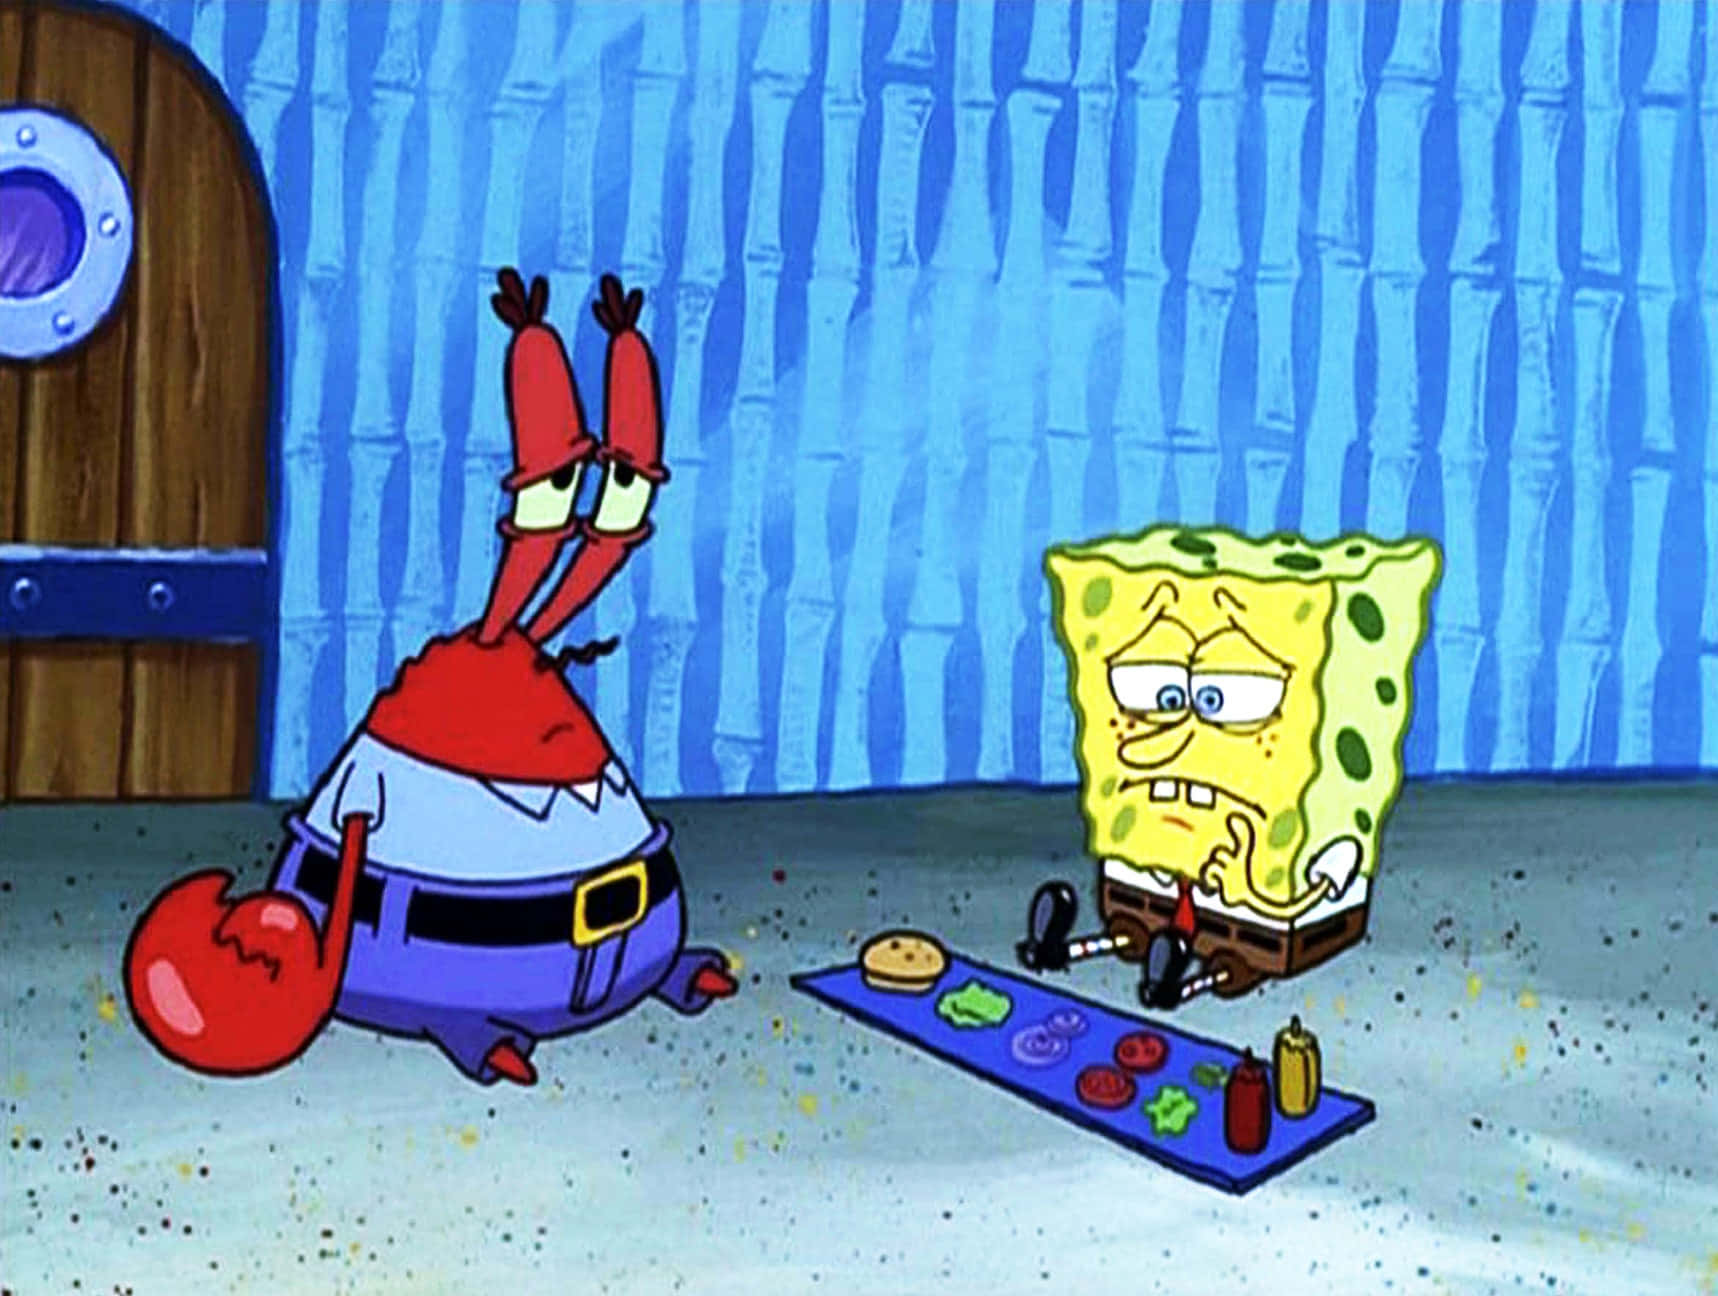 Download “spongebob Cries Over A Troubling Situation.” Wallpaper